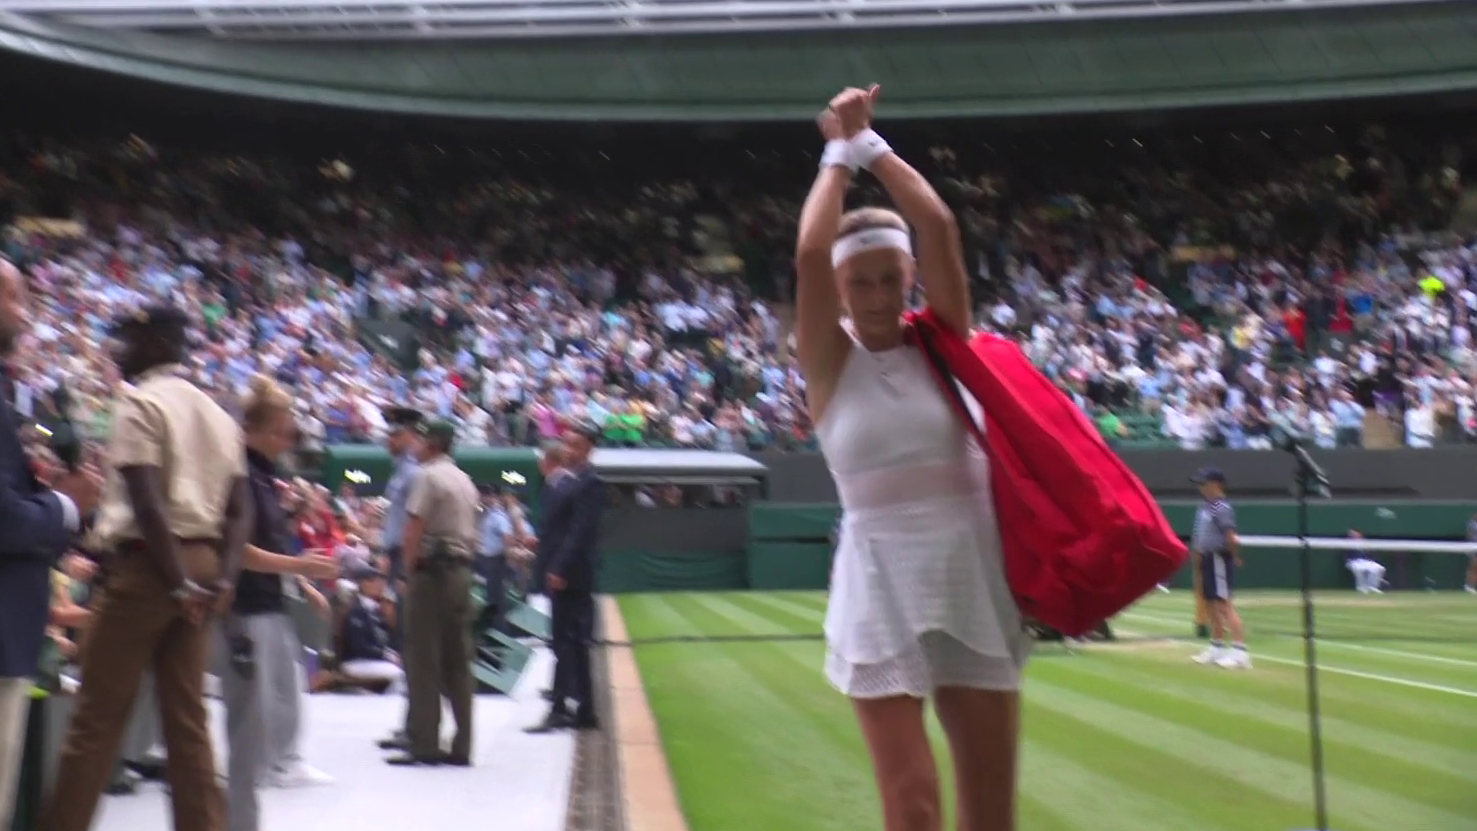 Victoria Azarenka responds to boos with provocative hand gesture in ugly end to absorbing Wimbledon clash